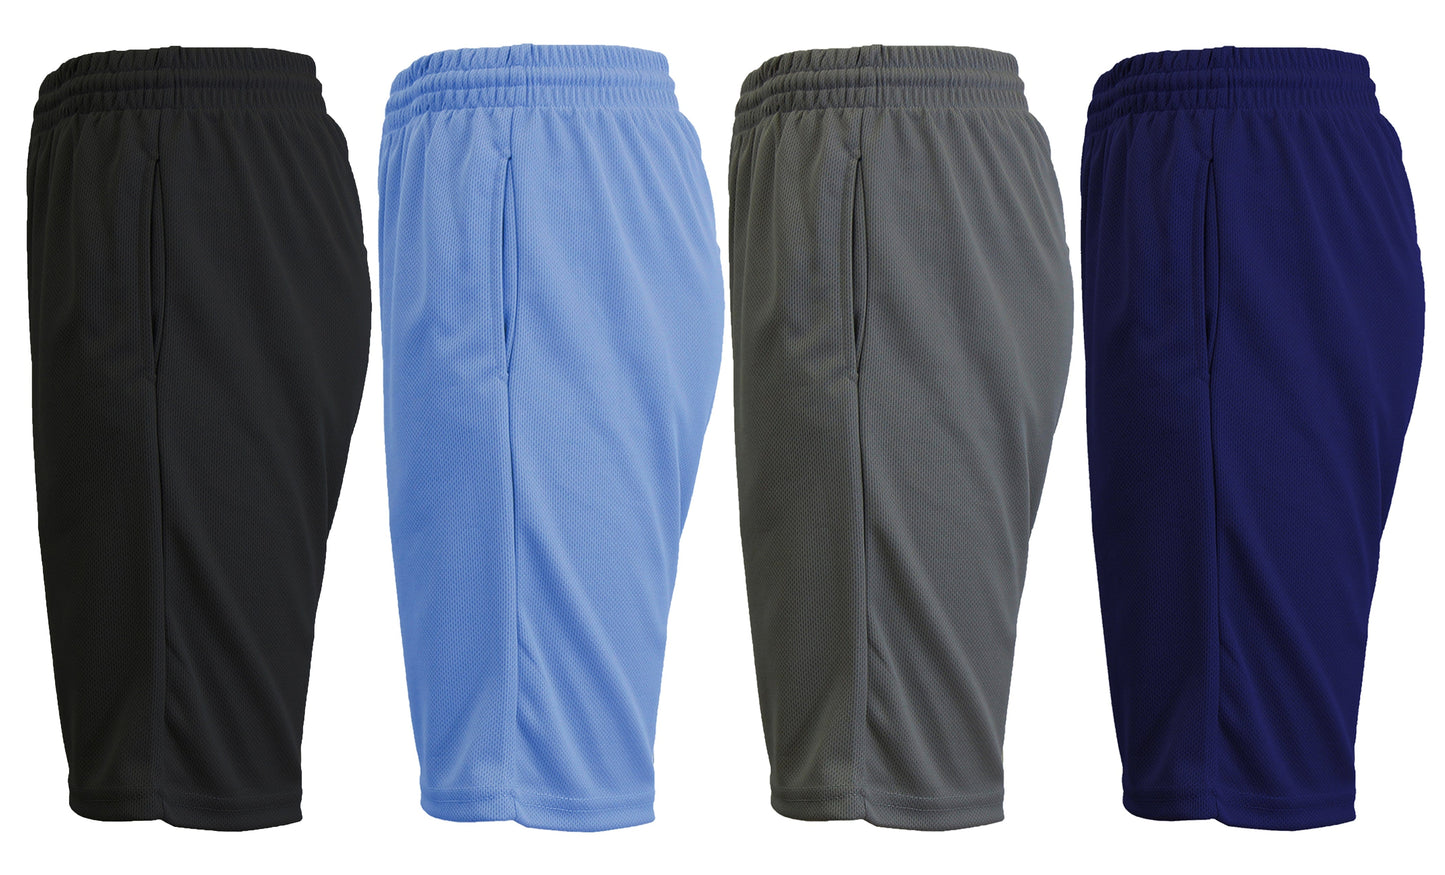 [4-PACK] Men's Solid Active Mesh Moisture Wicking Shorts - GalaxybyHarvic